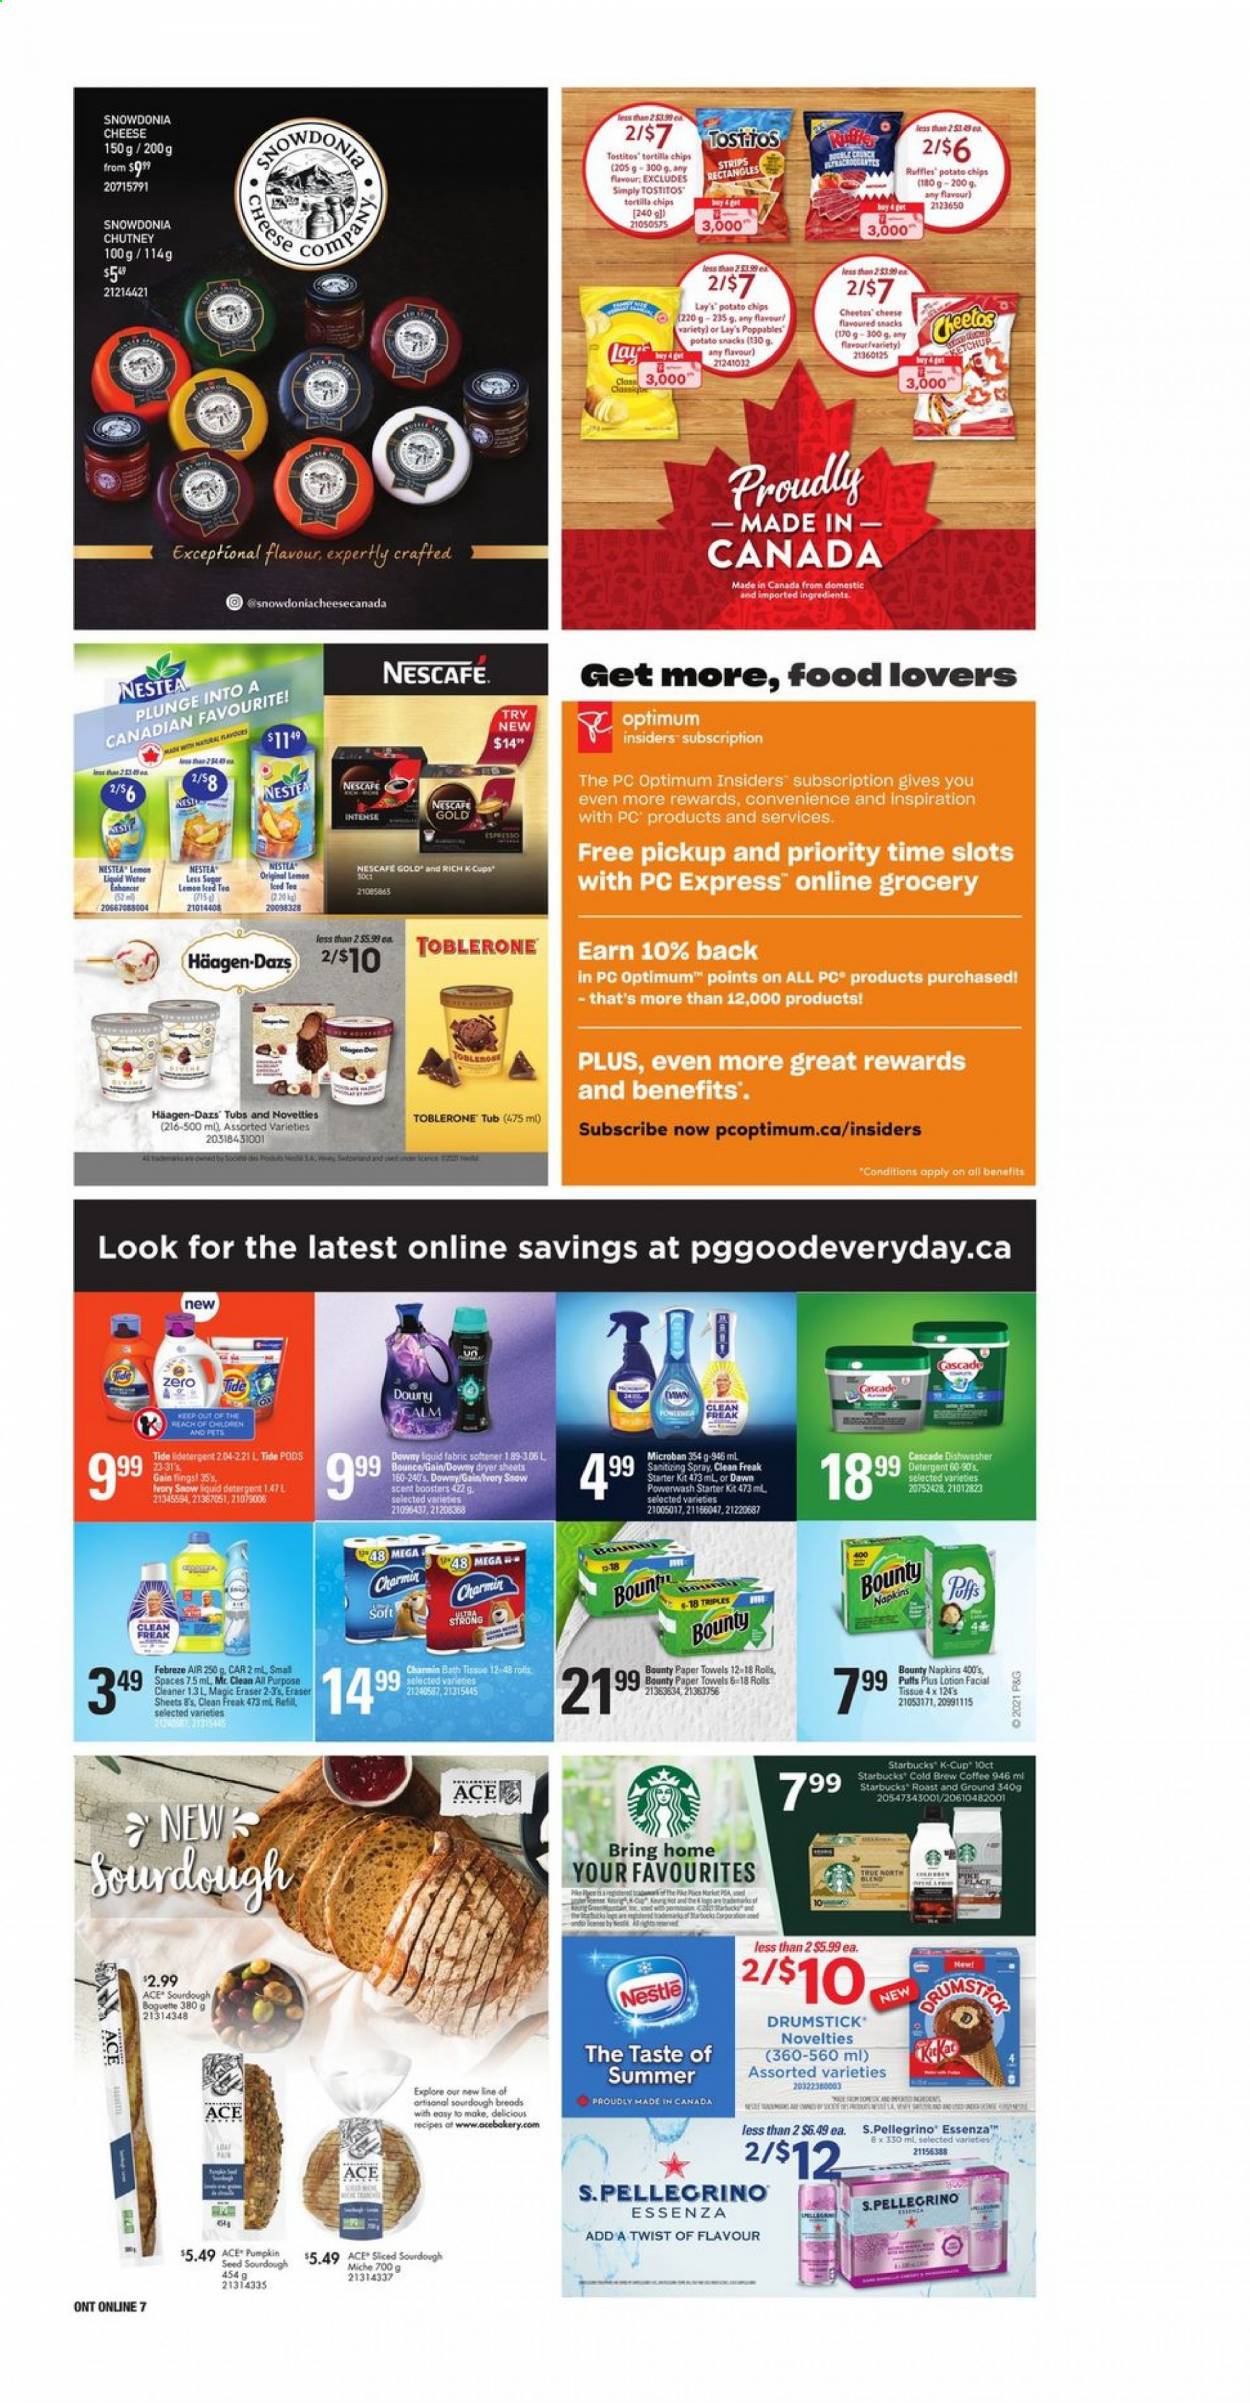 thumbnail - Independent Flyer - July 15, 2021 - July 21, 2021 - Sales products - Ace, cheese, Häagen-Dazs, snack, Bounty, Toblerone, tortilla chips, potato chips, Cheetos, Lay’s, Ruffles, Tostitos, ice tea, San Pellegrino, coffee, coffee capsules, Starbucks, K-Cups, napkins, bath tissue, kitchen towels, paper towels, Charmin, Febreze, Gain, cleaner, all purpose cleaner, Tide, fabric softener, liquid detergent, Bounce, Cascade, dryer sheets, scent booster, Downy Laundry, eraser, Optimum, Nestlé, chips, Nescafé. Page 11.